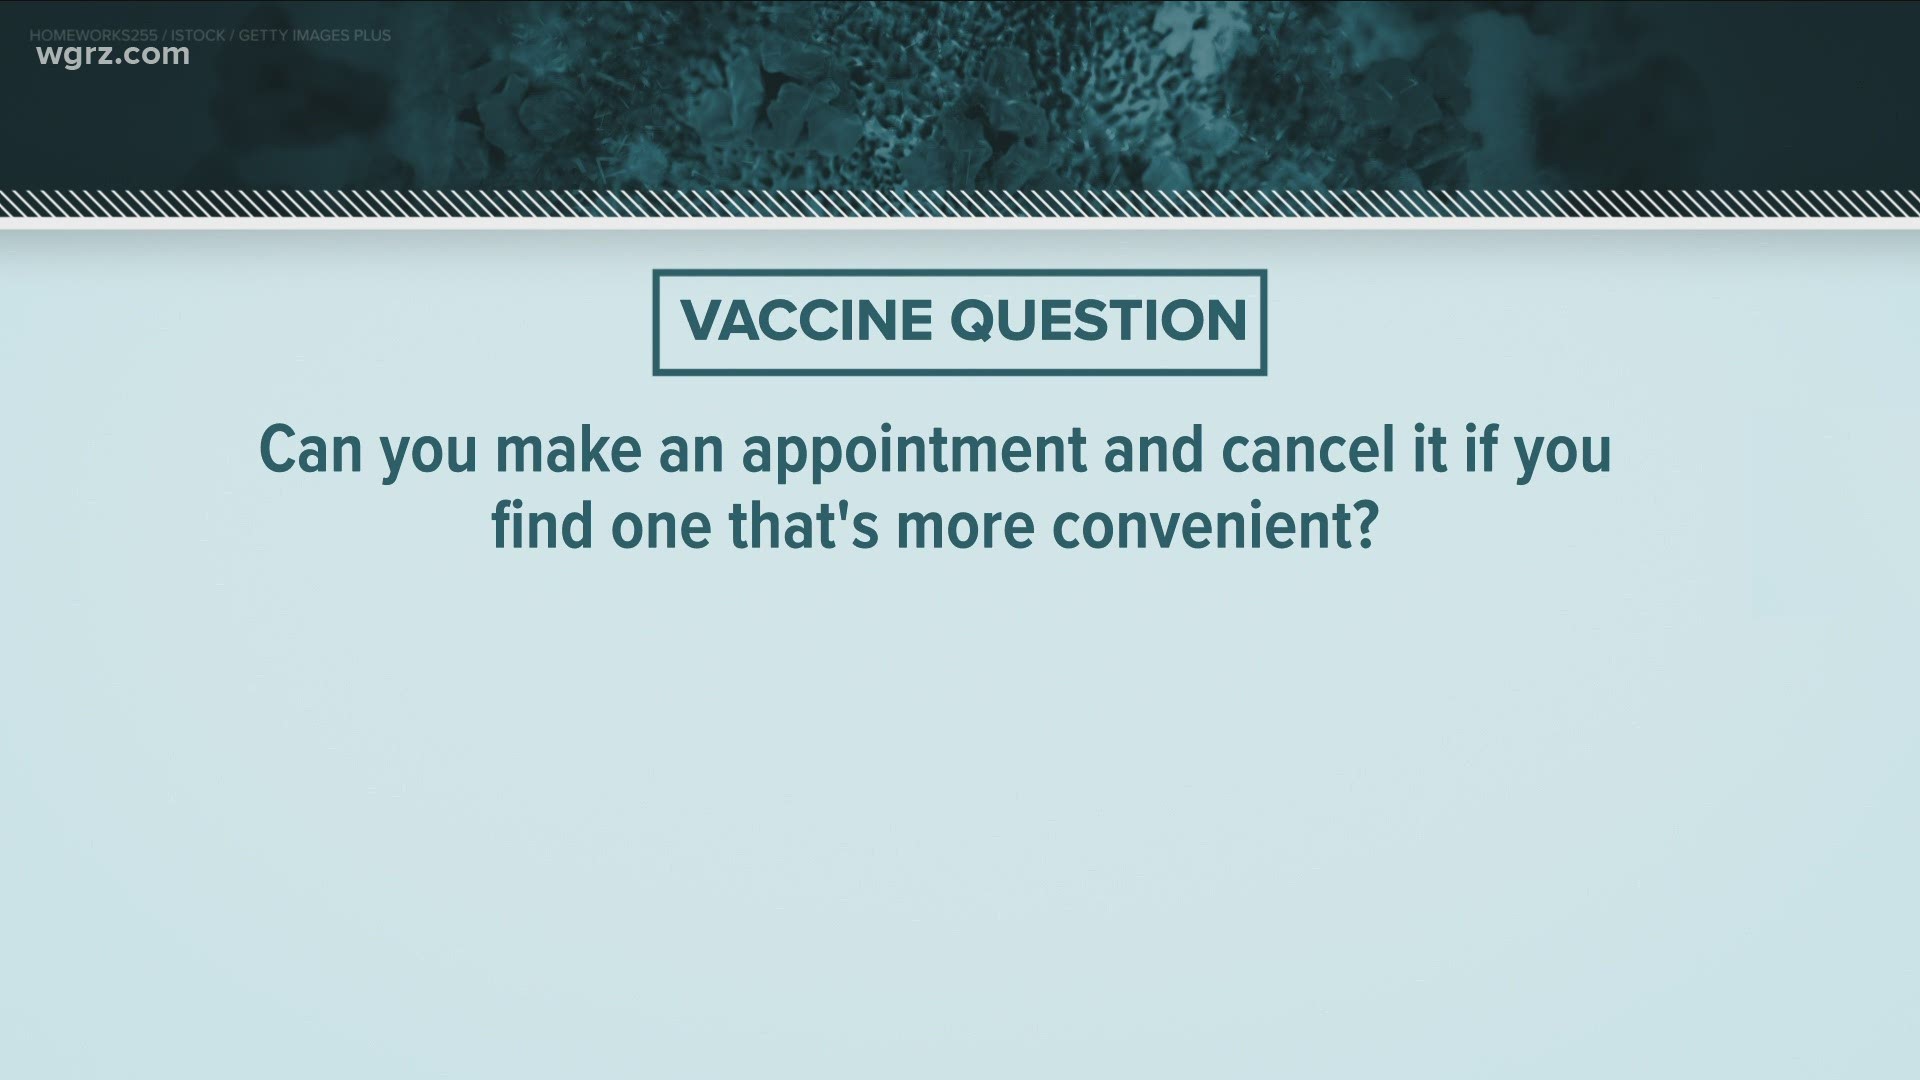 We are still getting a lot of questions about the vaccine and how the appointment process works.
We found answers to some of the questions you've been sending.